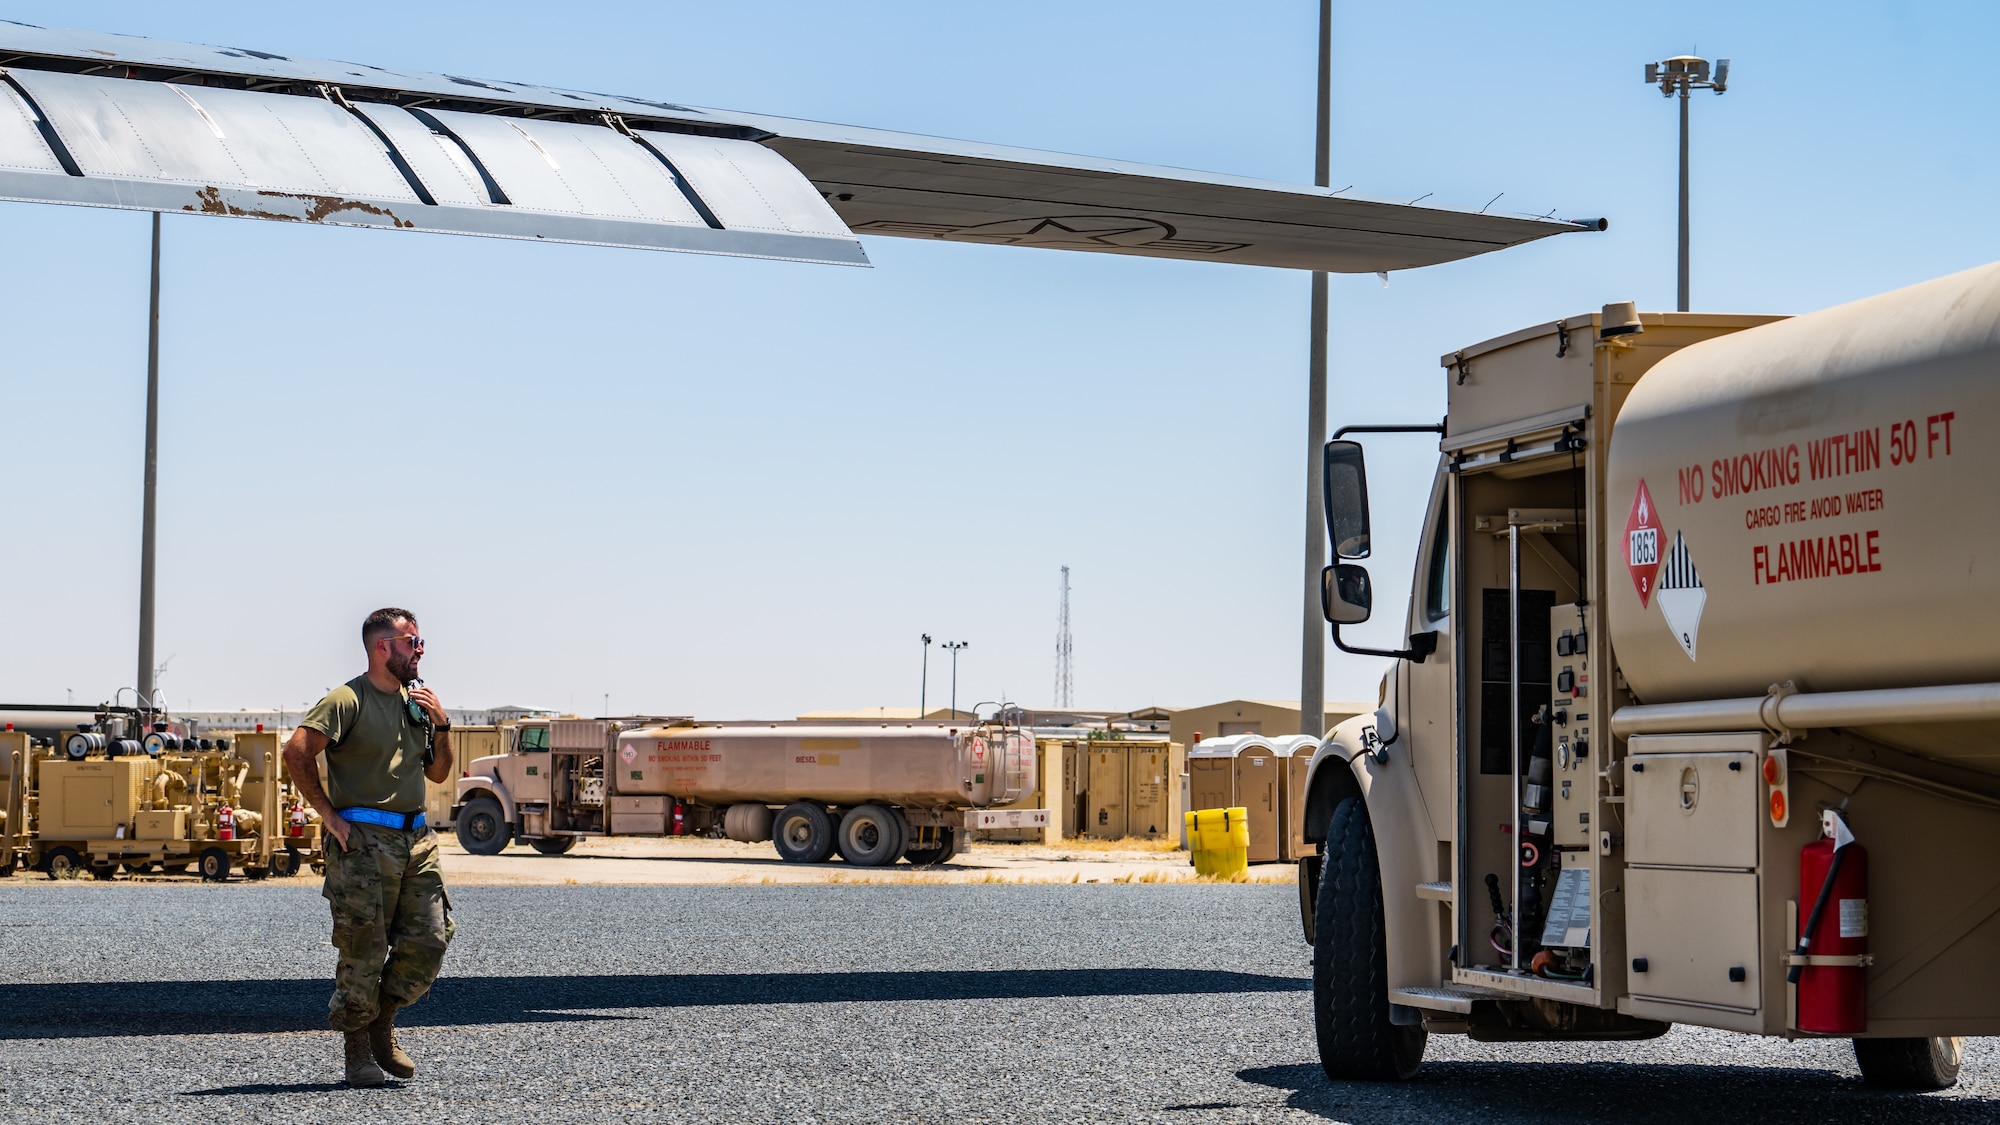 A C-130J Super Hercules crew chief assigned to the 386th Expeditionary Aircraft Maintenance Squadron directs a fuel truck into position before training with the 386th Expeditionary Logistics Readiness Squadron’s petroleum, oils and lubricants (POL) flight at Ali Al Salem Air Base, Kuwait, July 3, 2023. This training provided the opportunity for the 386th EAMXS to receive hands-on training from the POL flight so they are prepared to operate fuel trucks and service liquid nitrogen carts, thus furthering their abilities as Multi-Capable Airmen. (U.S. Air Force photo by Staff Sgt. Kevin Long)